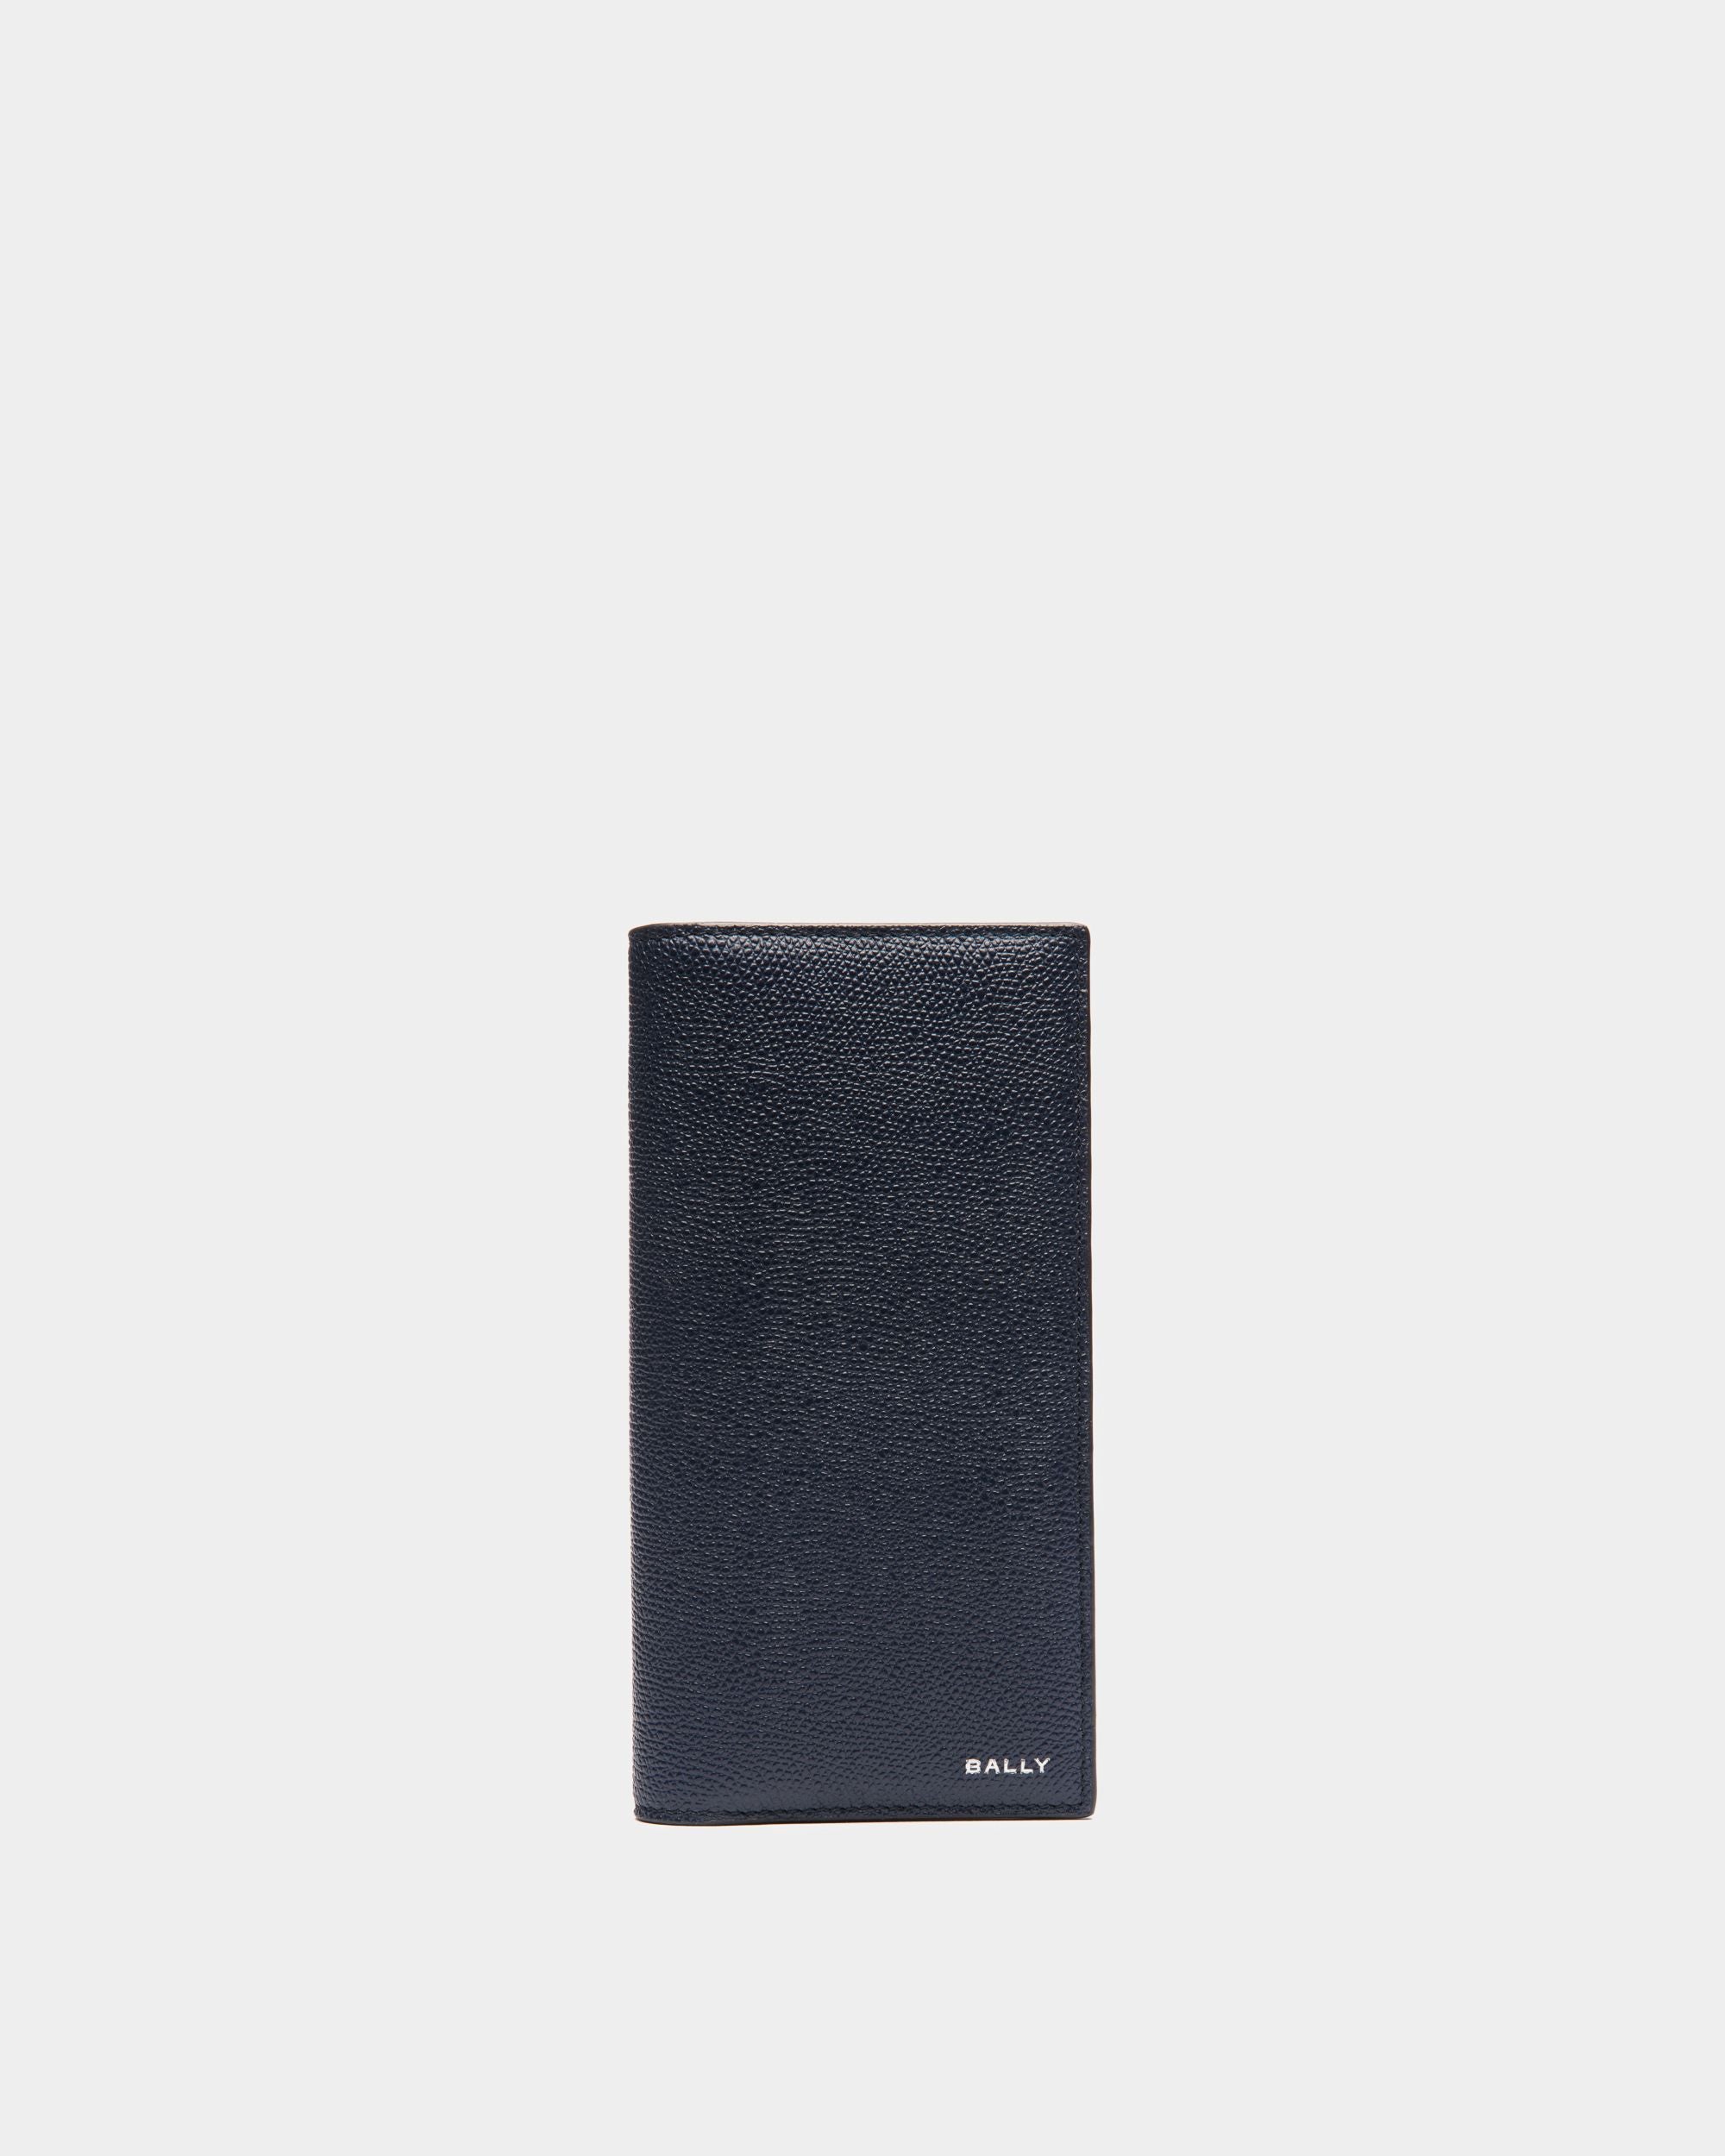 Flag | Men's Continental Wallet in Blue Leather | Bally | Still Life Front